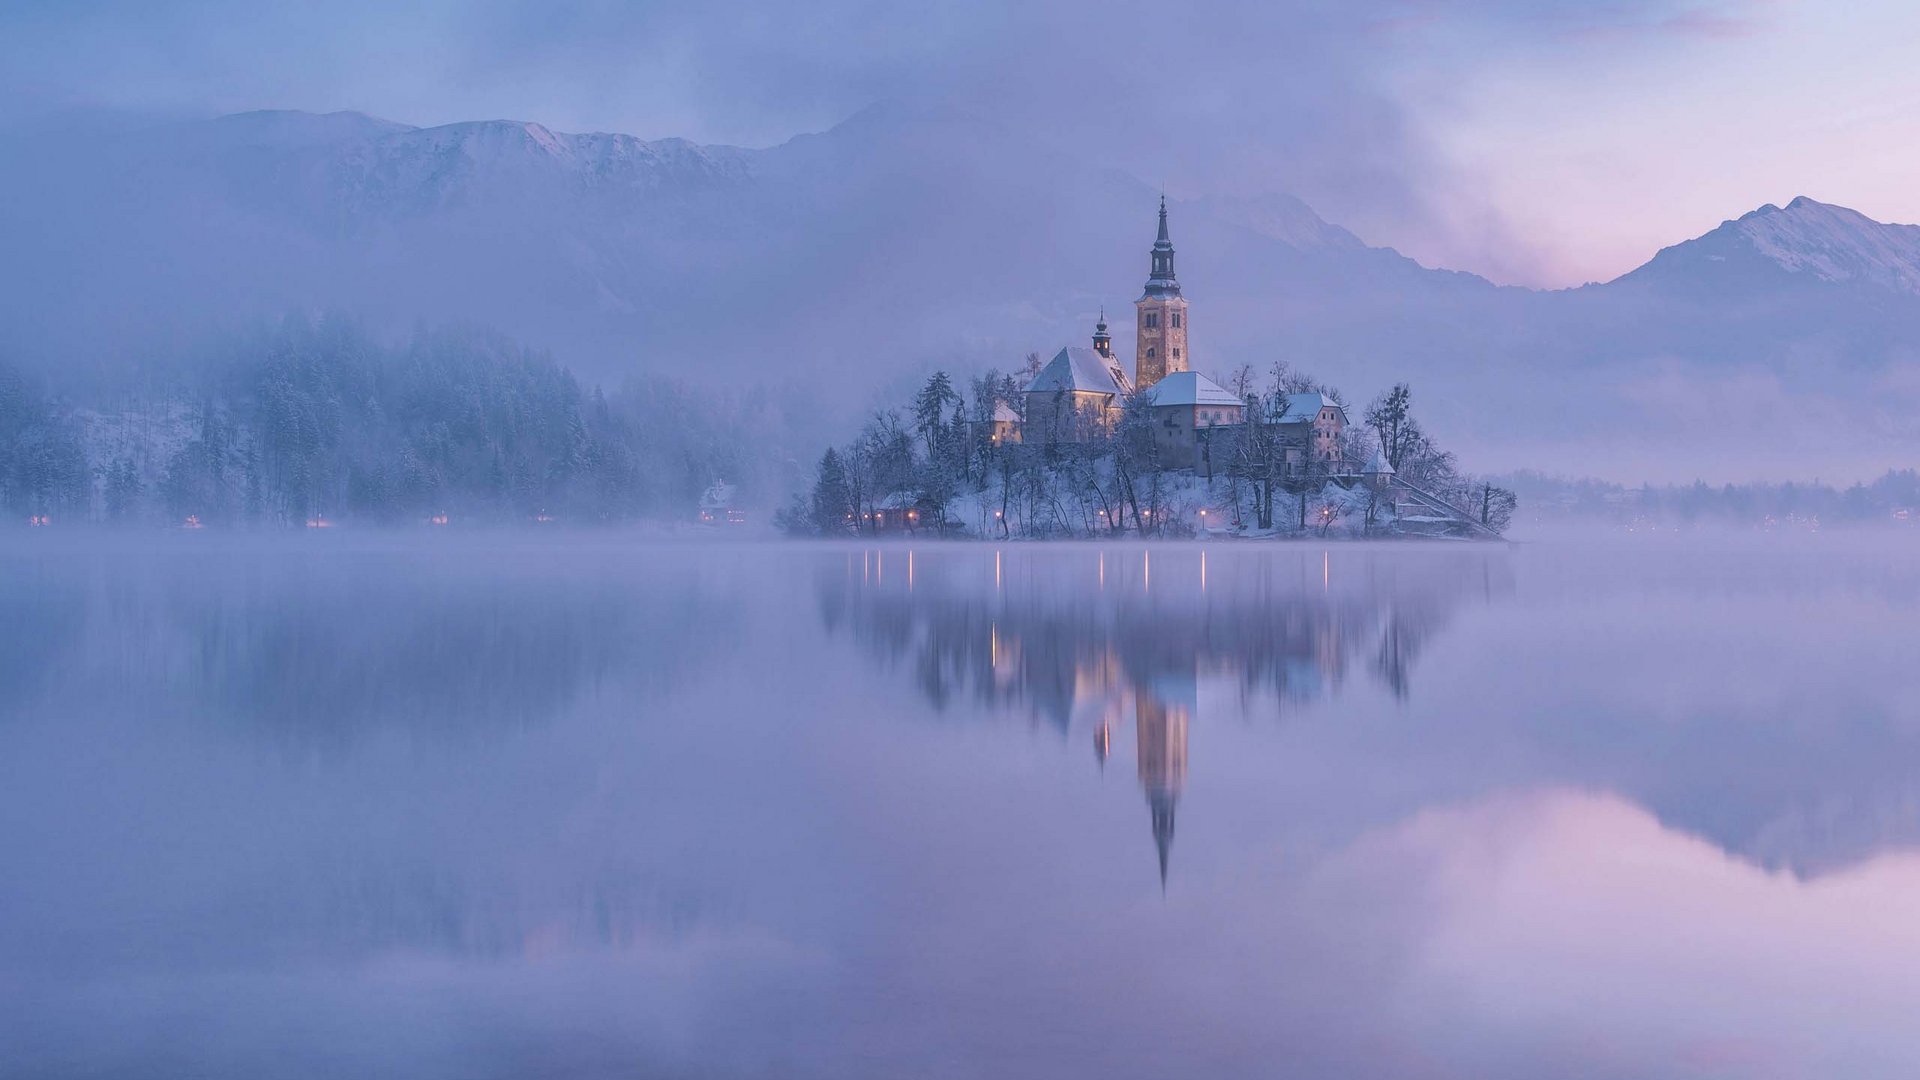 Bled – a jewel in the Alps